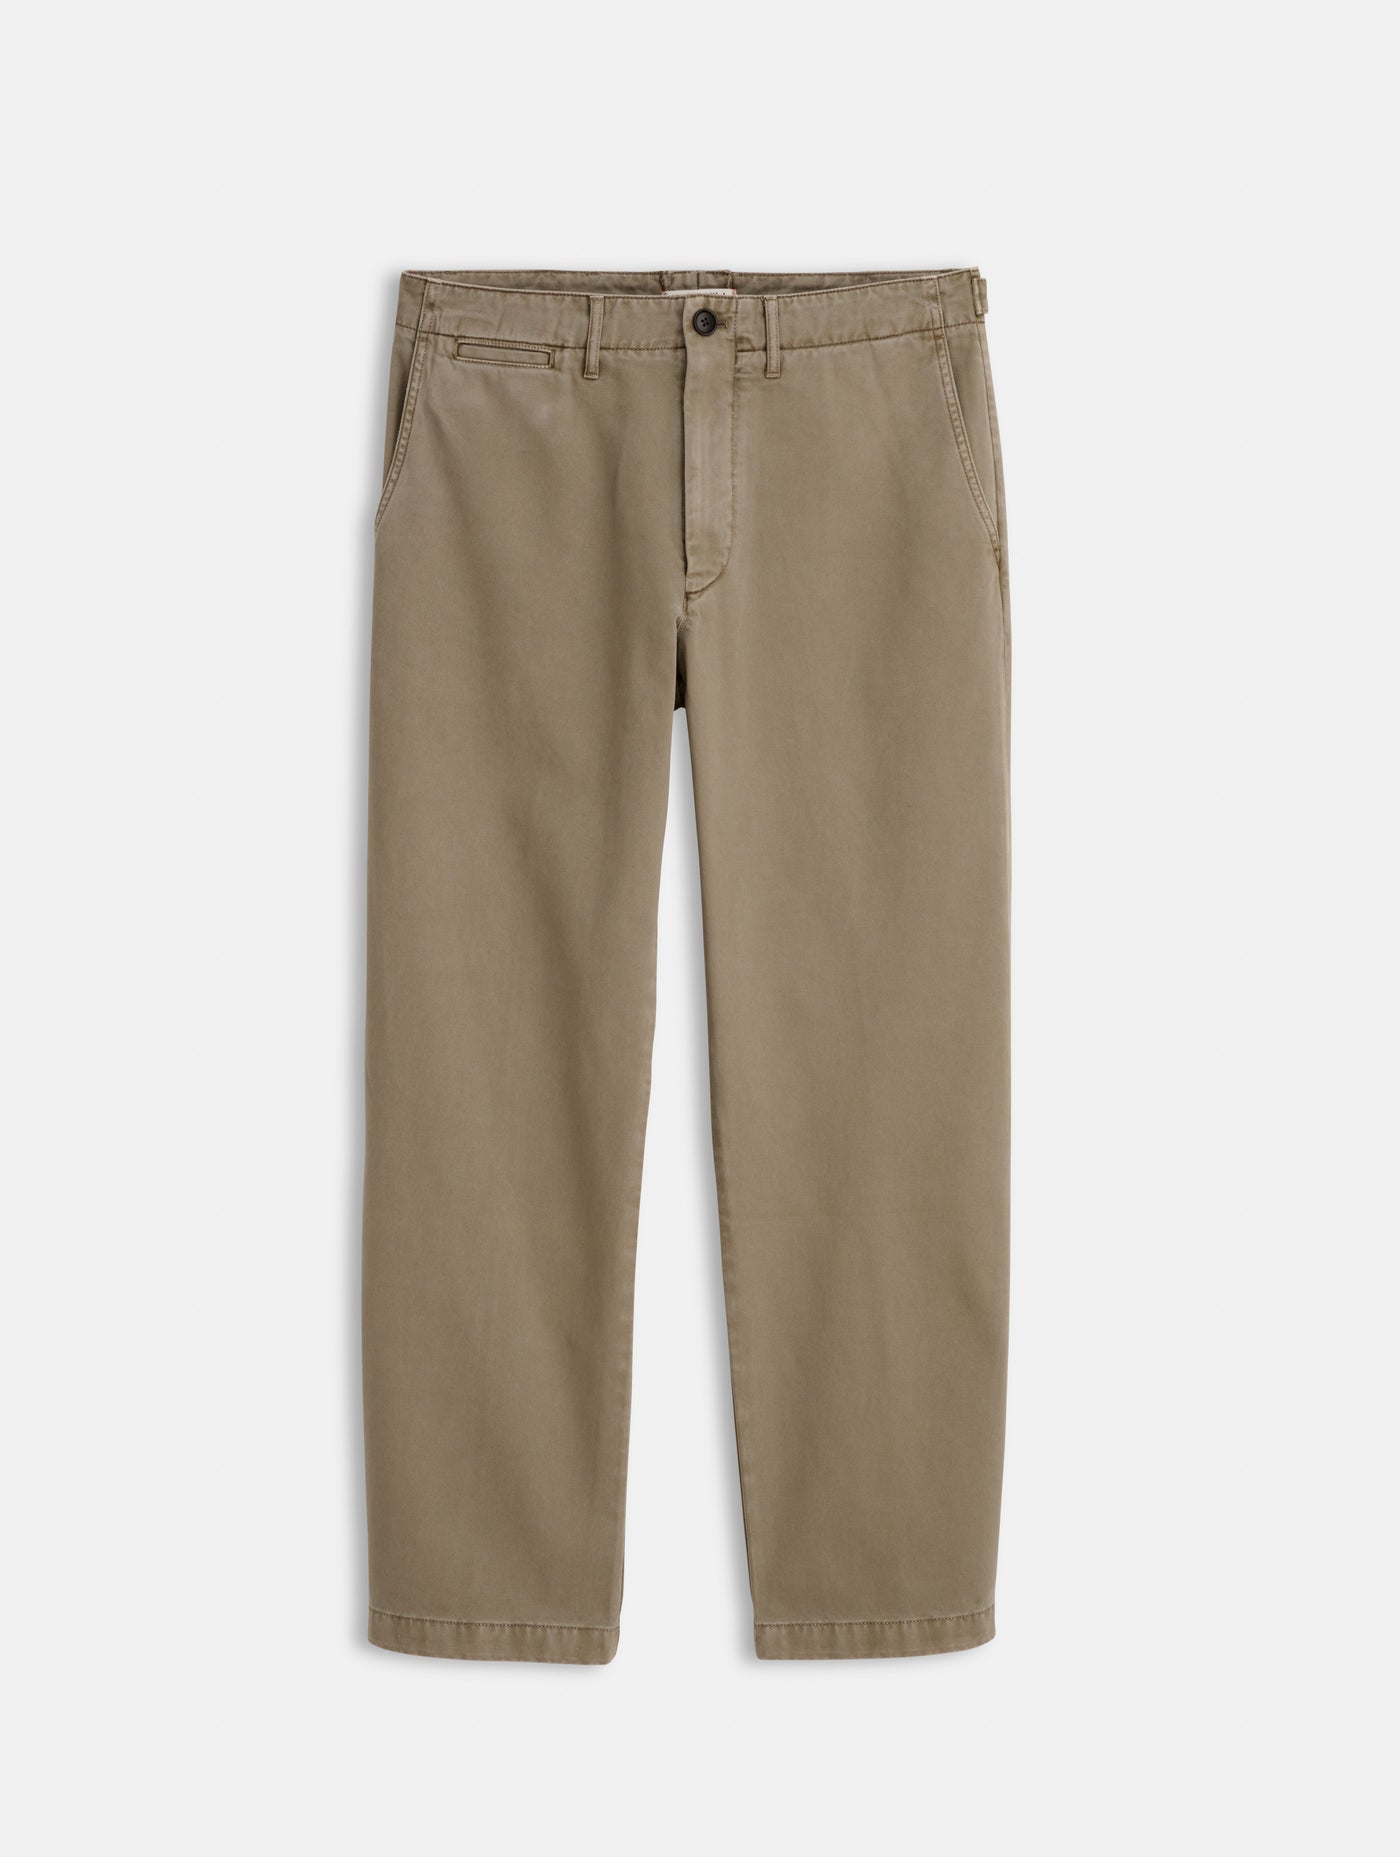 Straight Leg Pant in Vintage Washed Chino (Long Inseam)